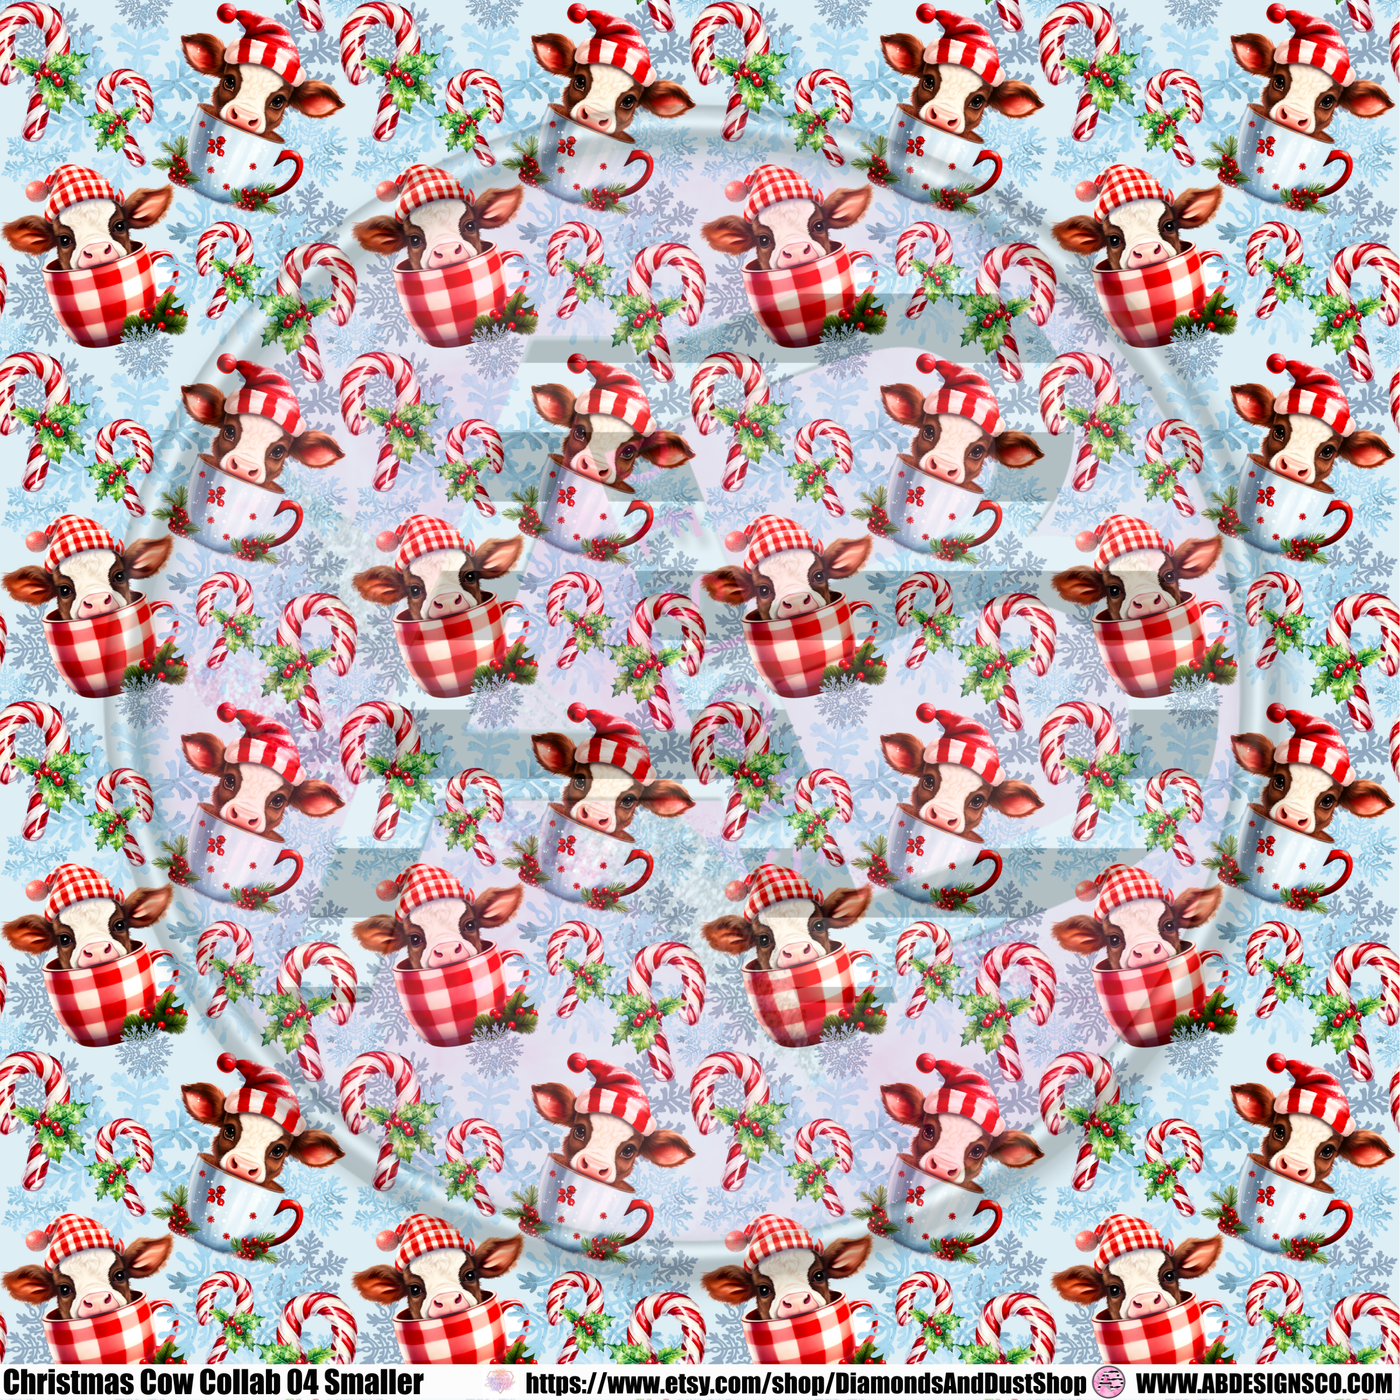 Adhesive Patterned Vinyl - Christmas Cow Collab 04 Smaller